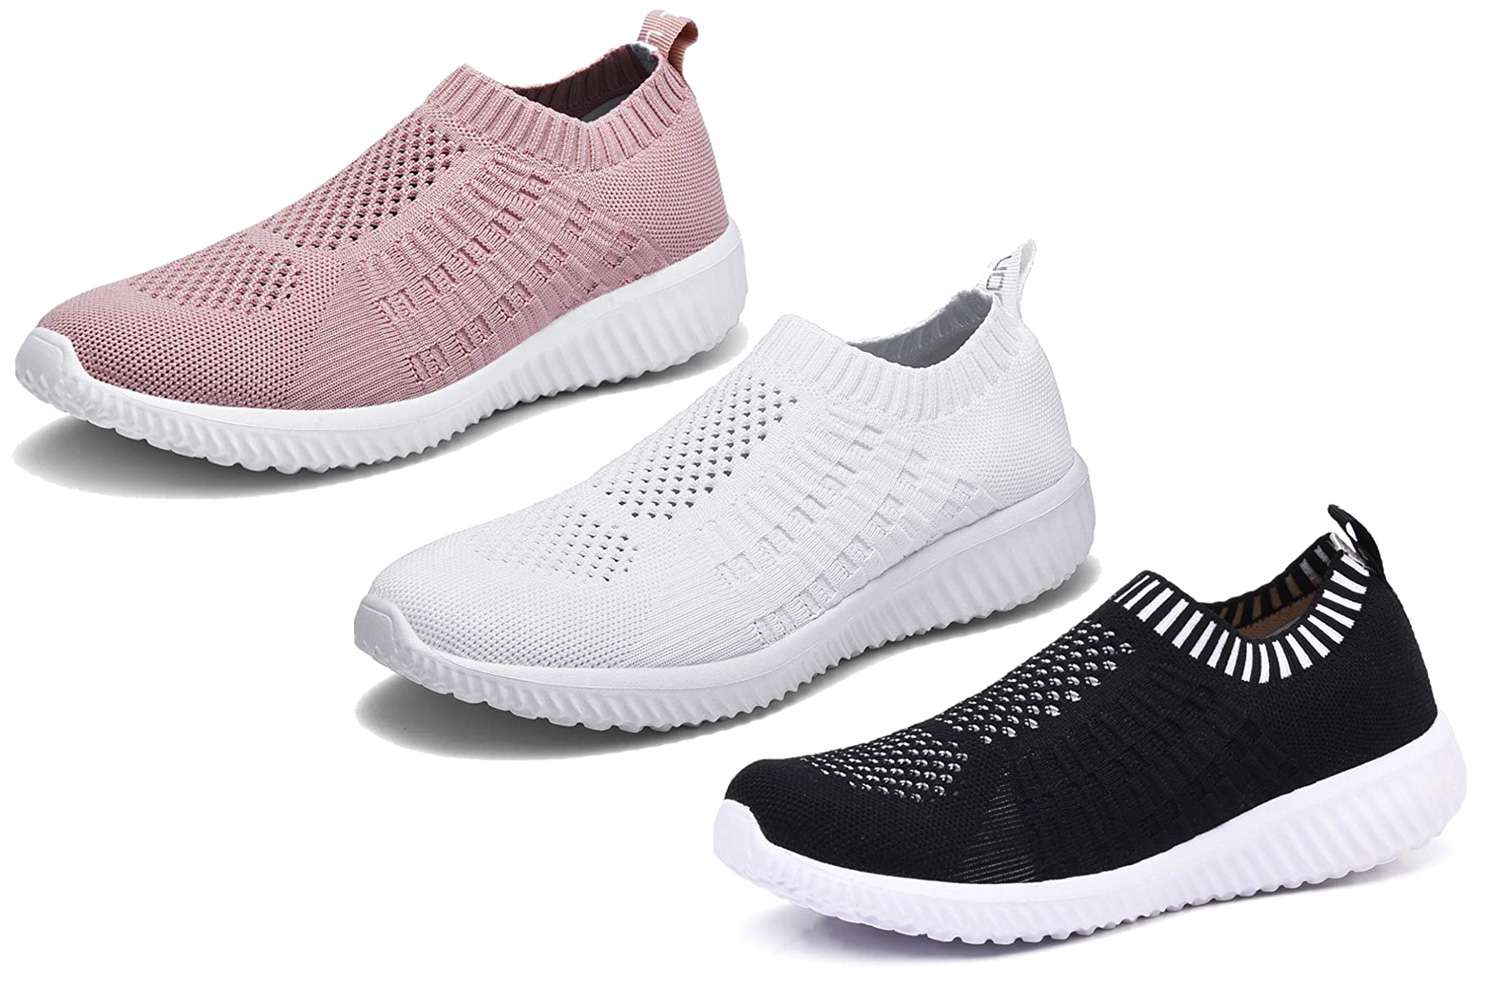 Hessimy Womens Athletic Slip On Walking Shoes Lightweight Casual Mesh-Comfortable Running Sneakers